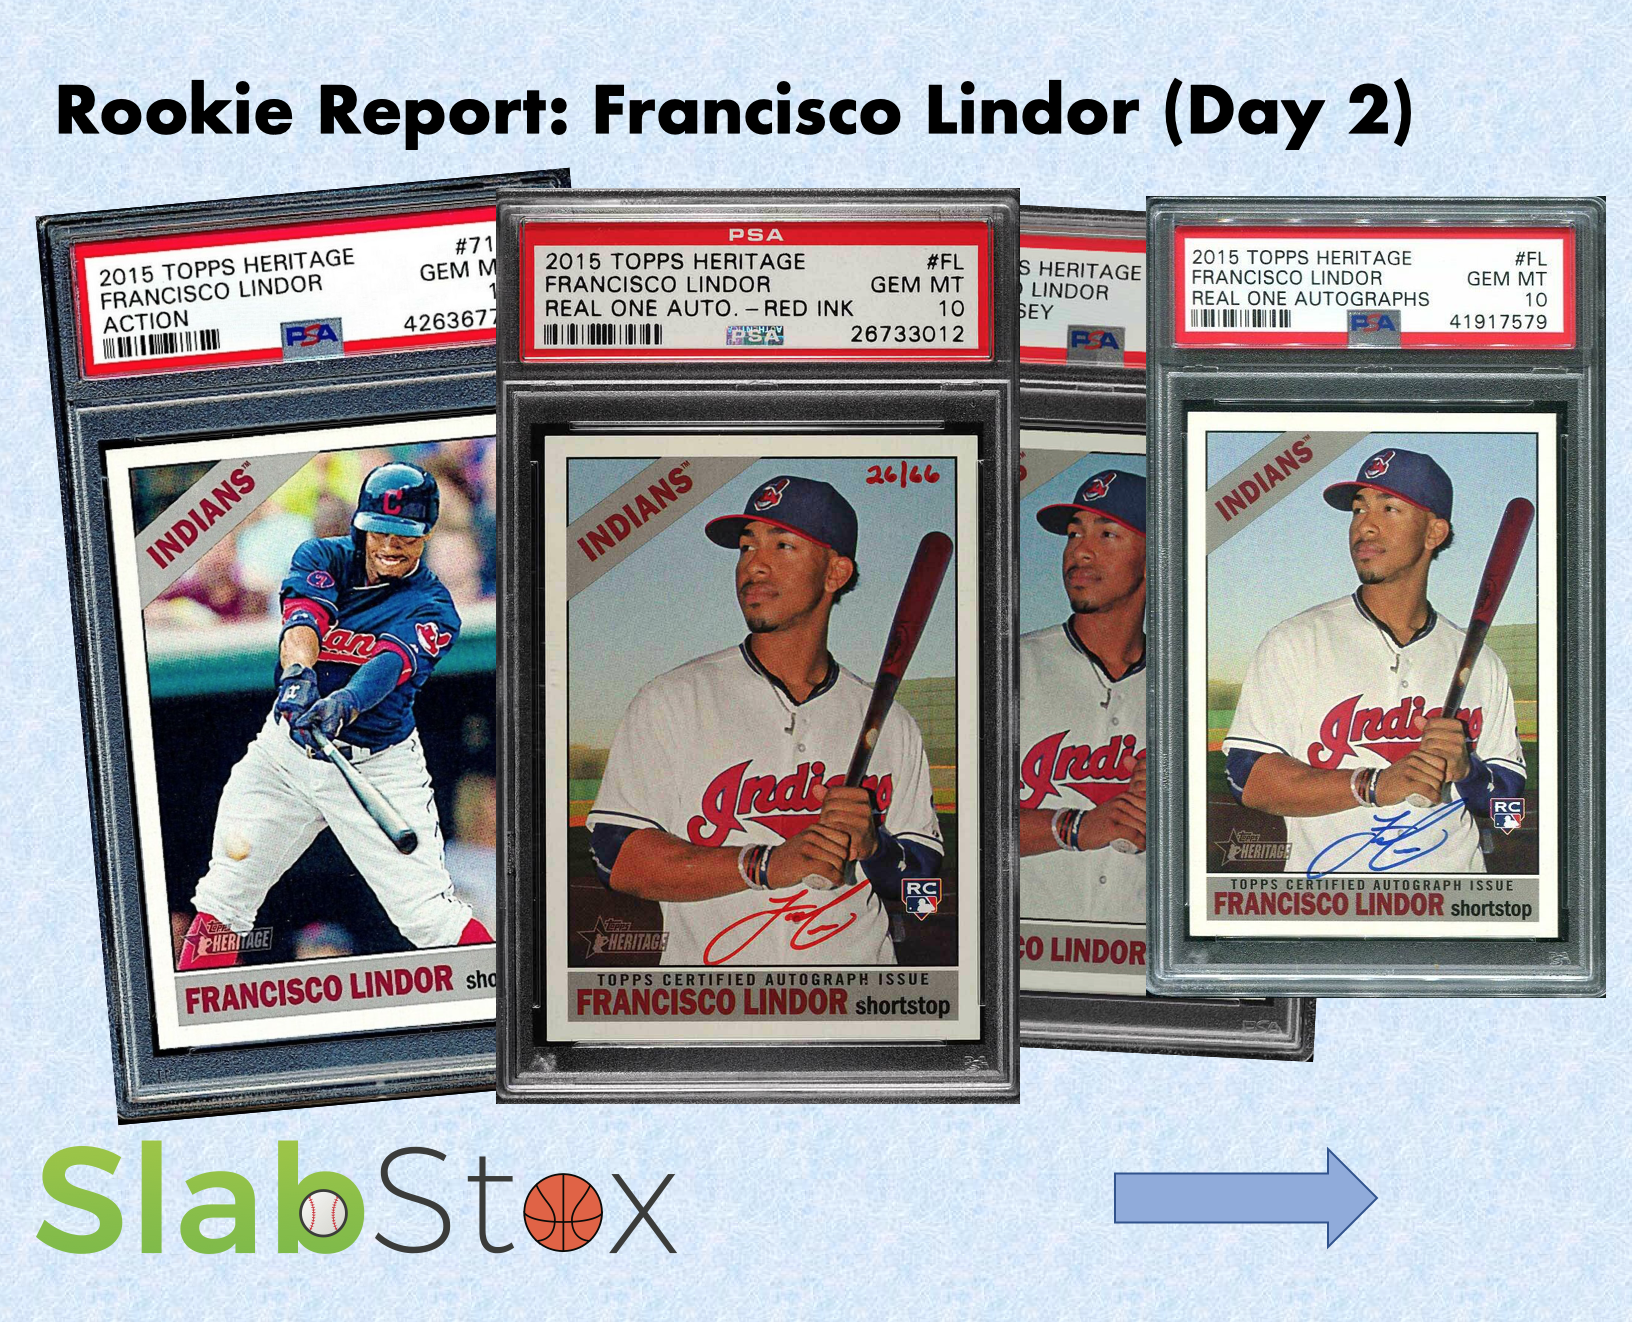 SlabStox Rookie Report infographic for Francisco Lindor sports trading cards